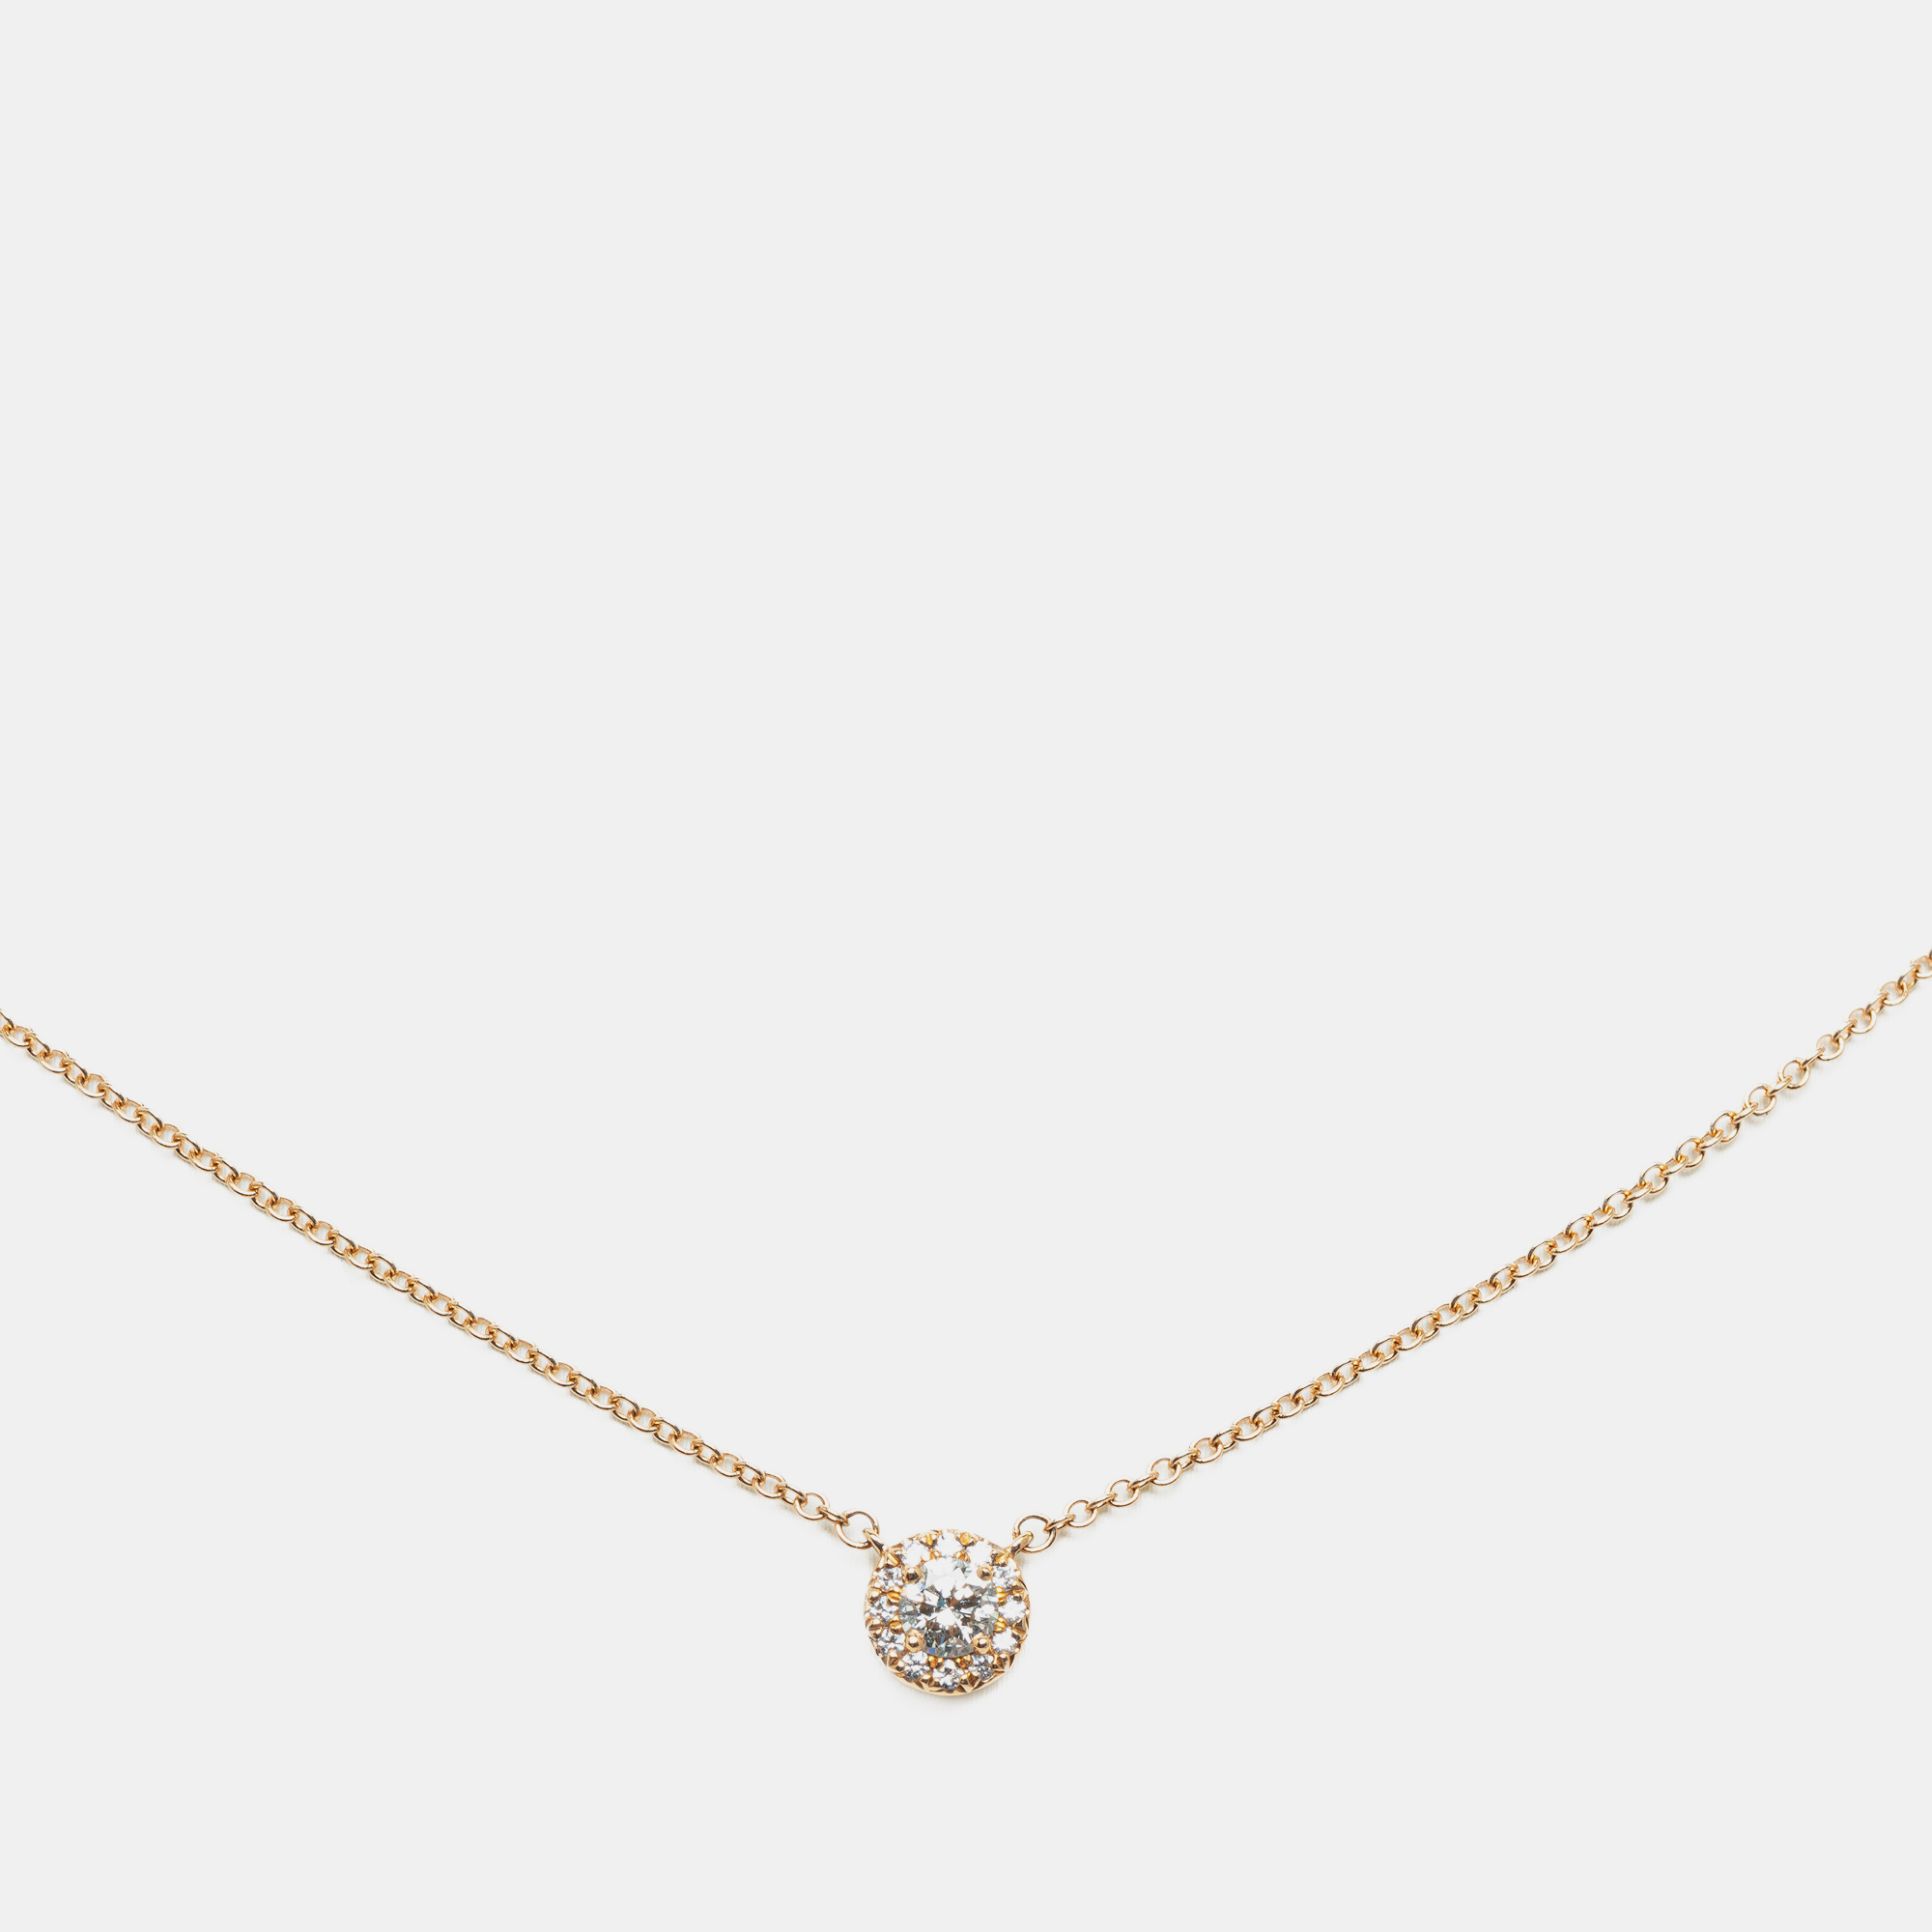 Tiffany & co. 18k yellow gold soleste necklace